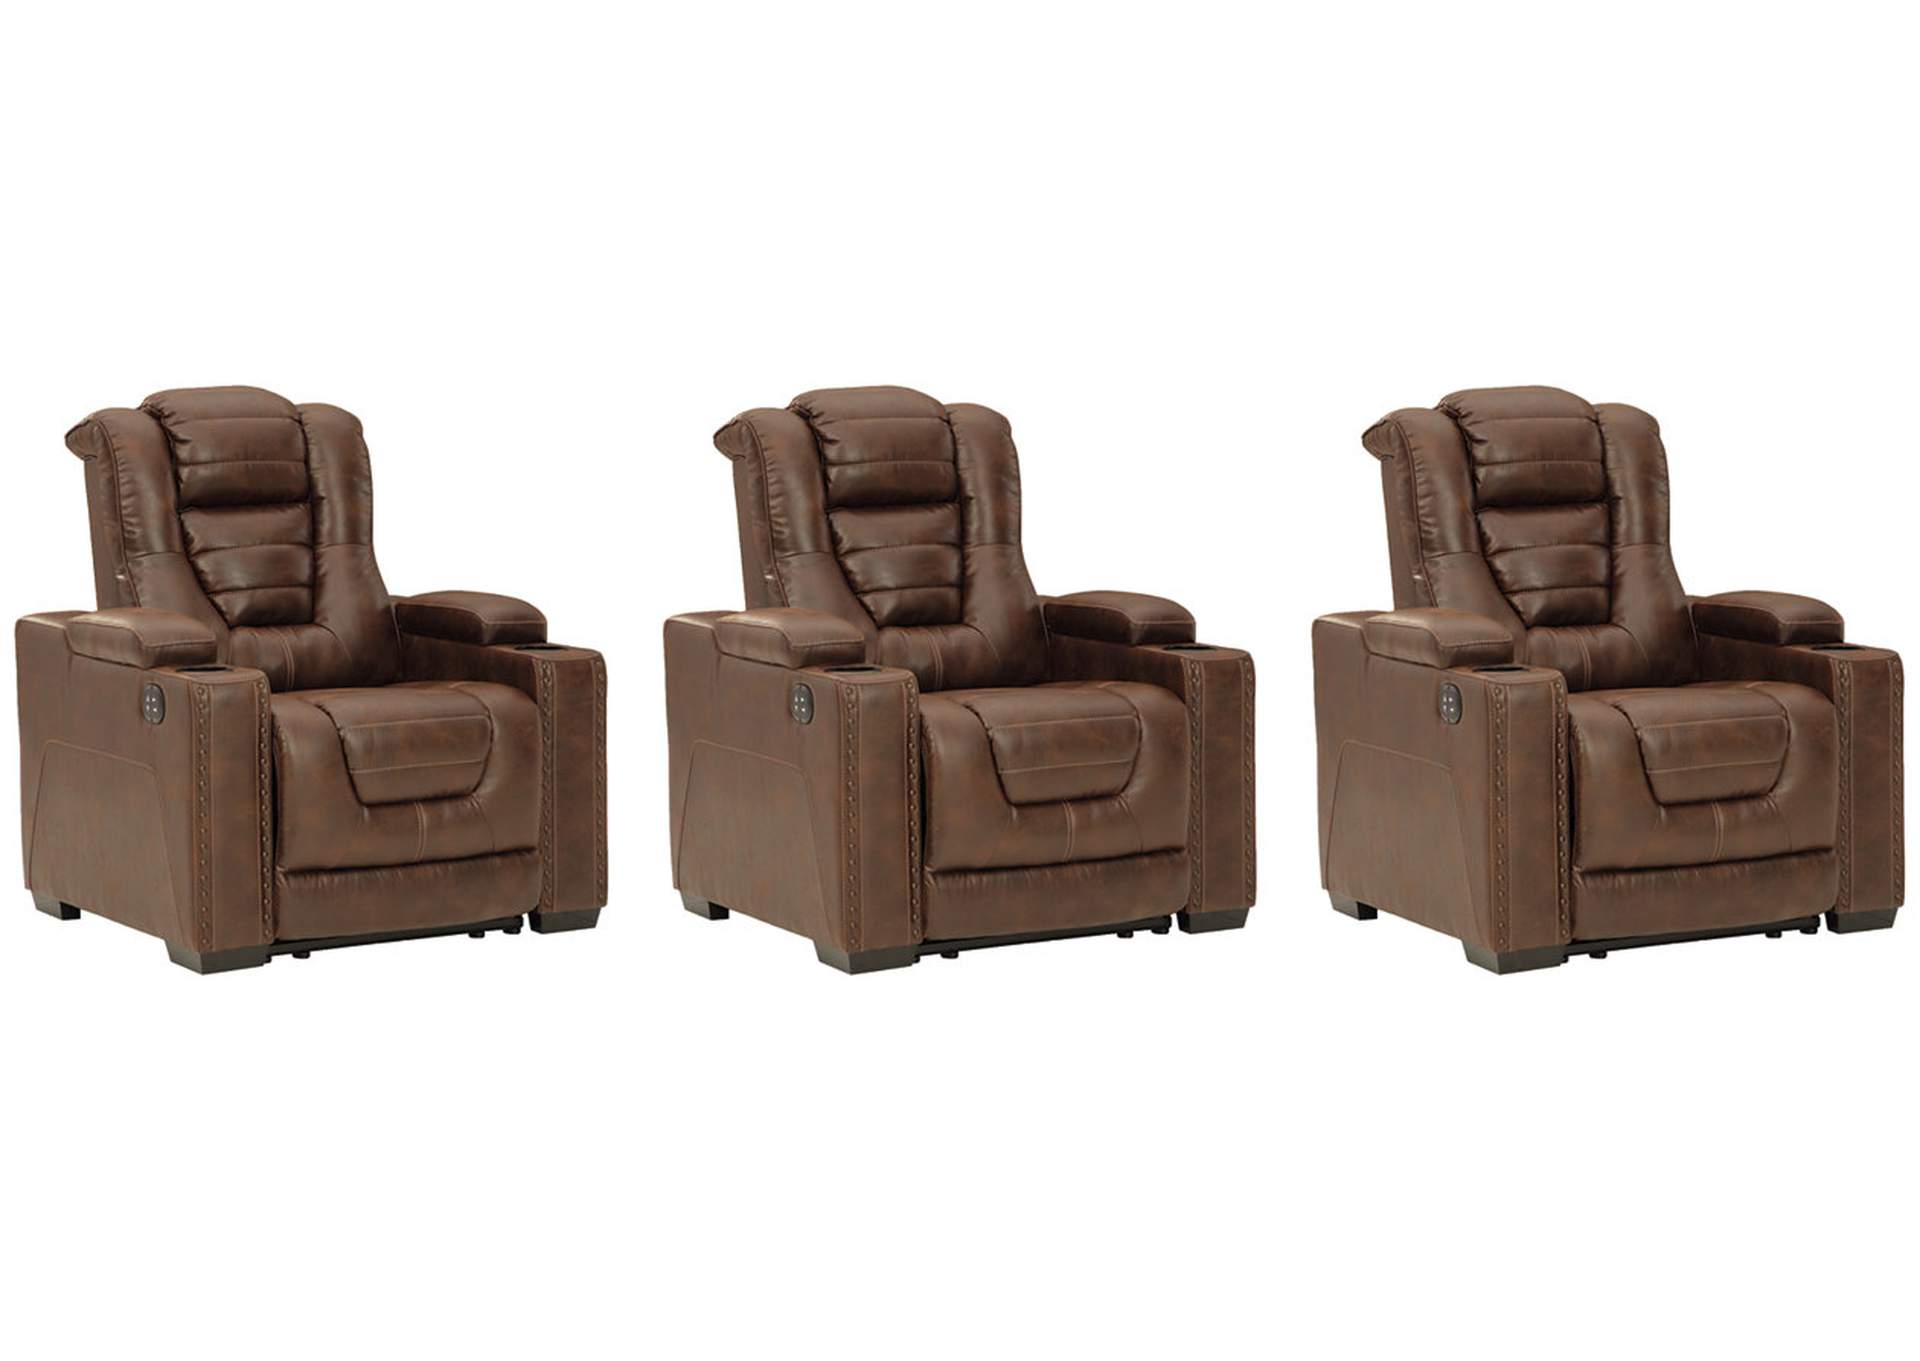 Owner's Box 3-Piece Home Theater Seating,Signature Design By Ashley